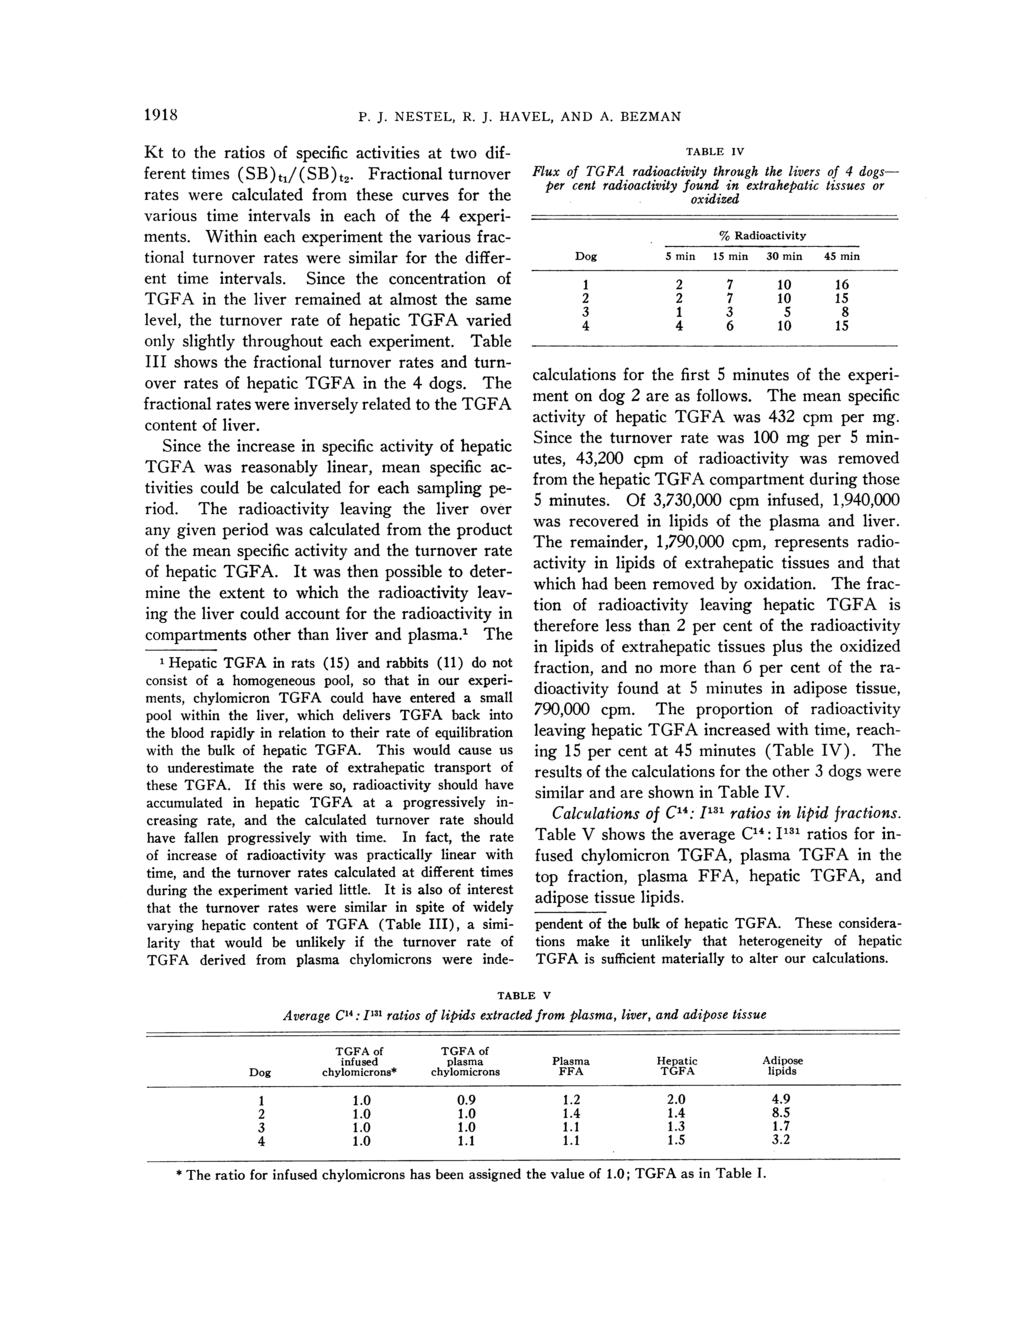 1918 P. J. NESTEL, R. J. HAVEL, AND A. BEZMAN Kt to the ratios of specific activities at two different times (SB) t/(sb) t.